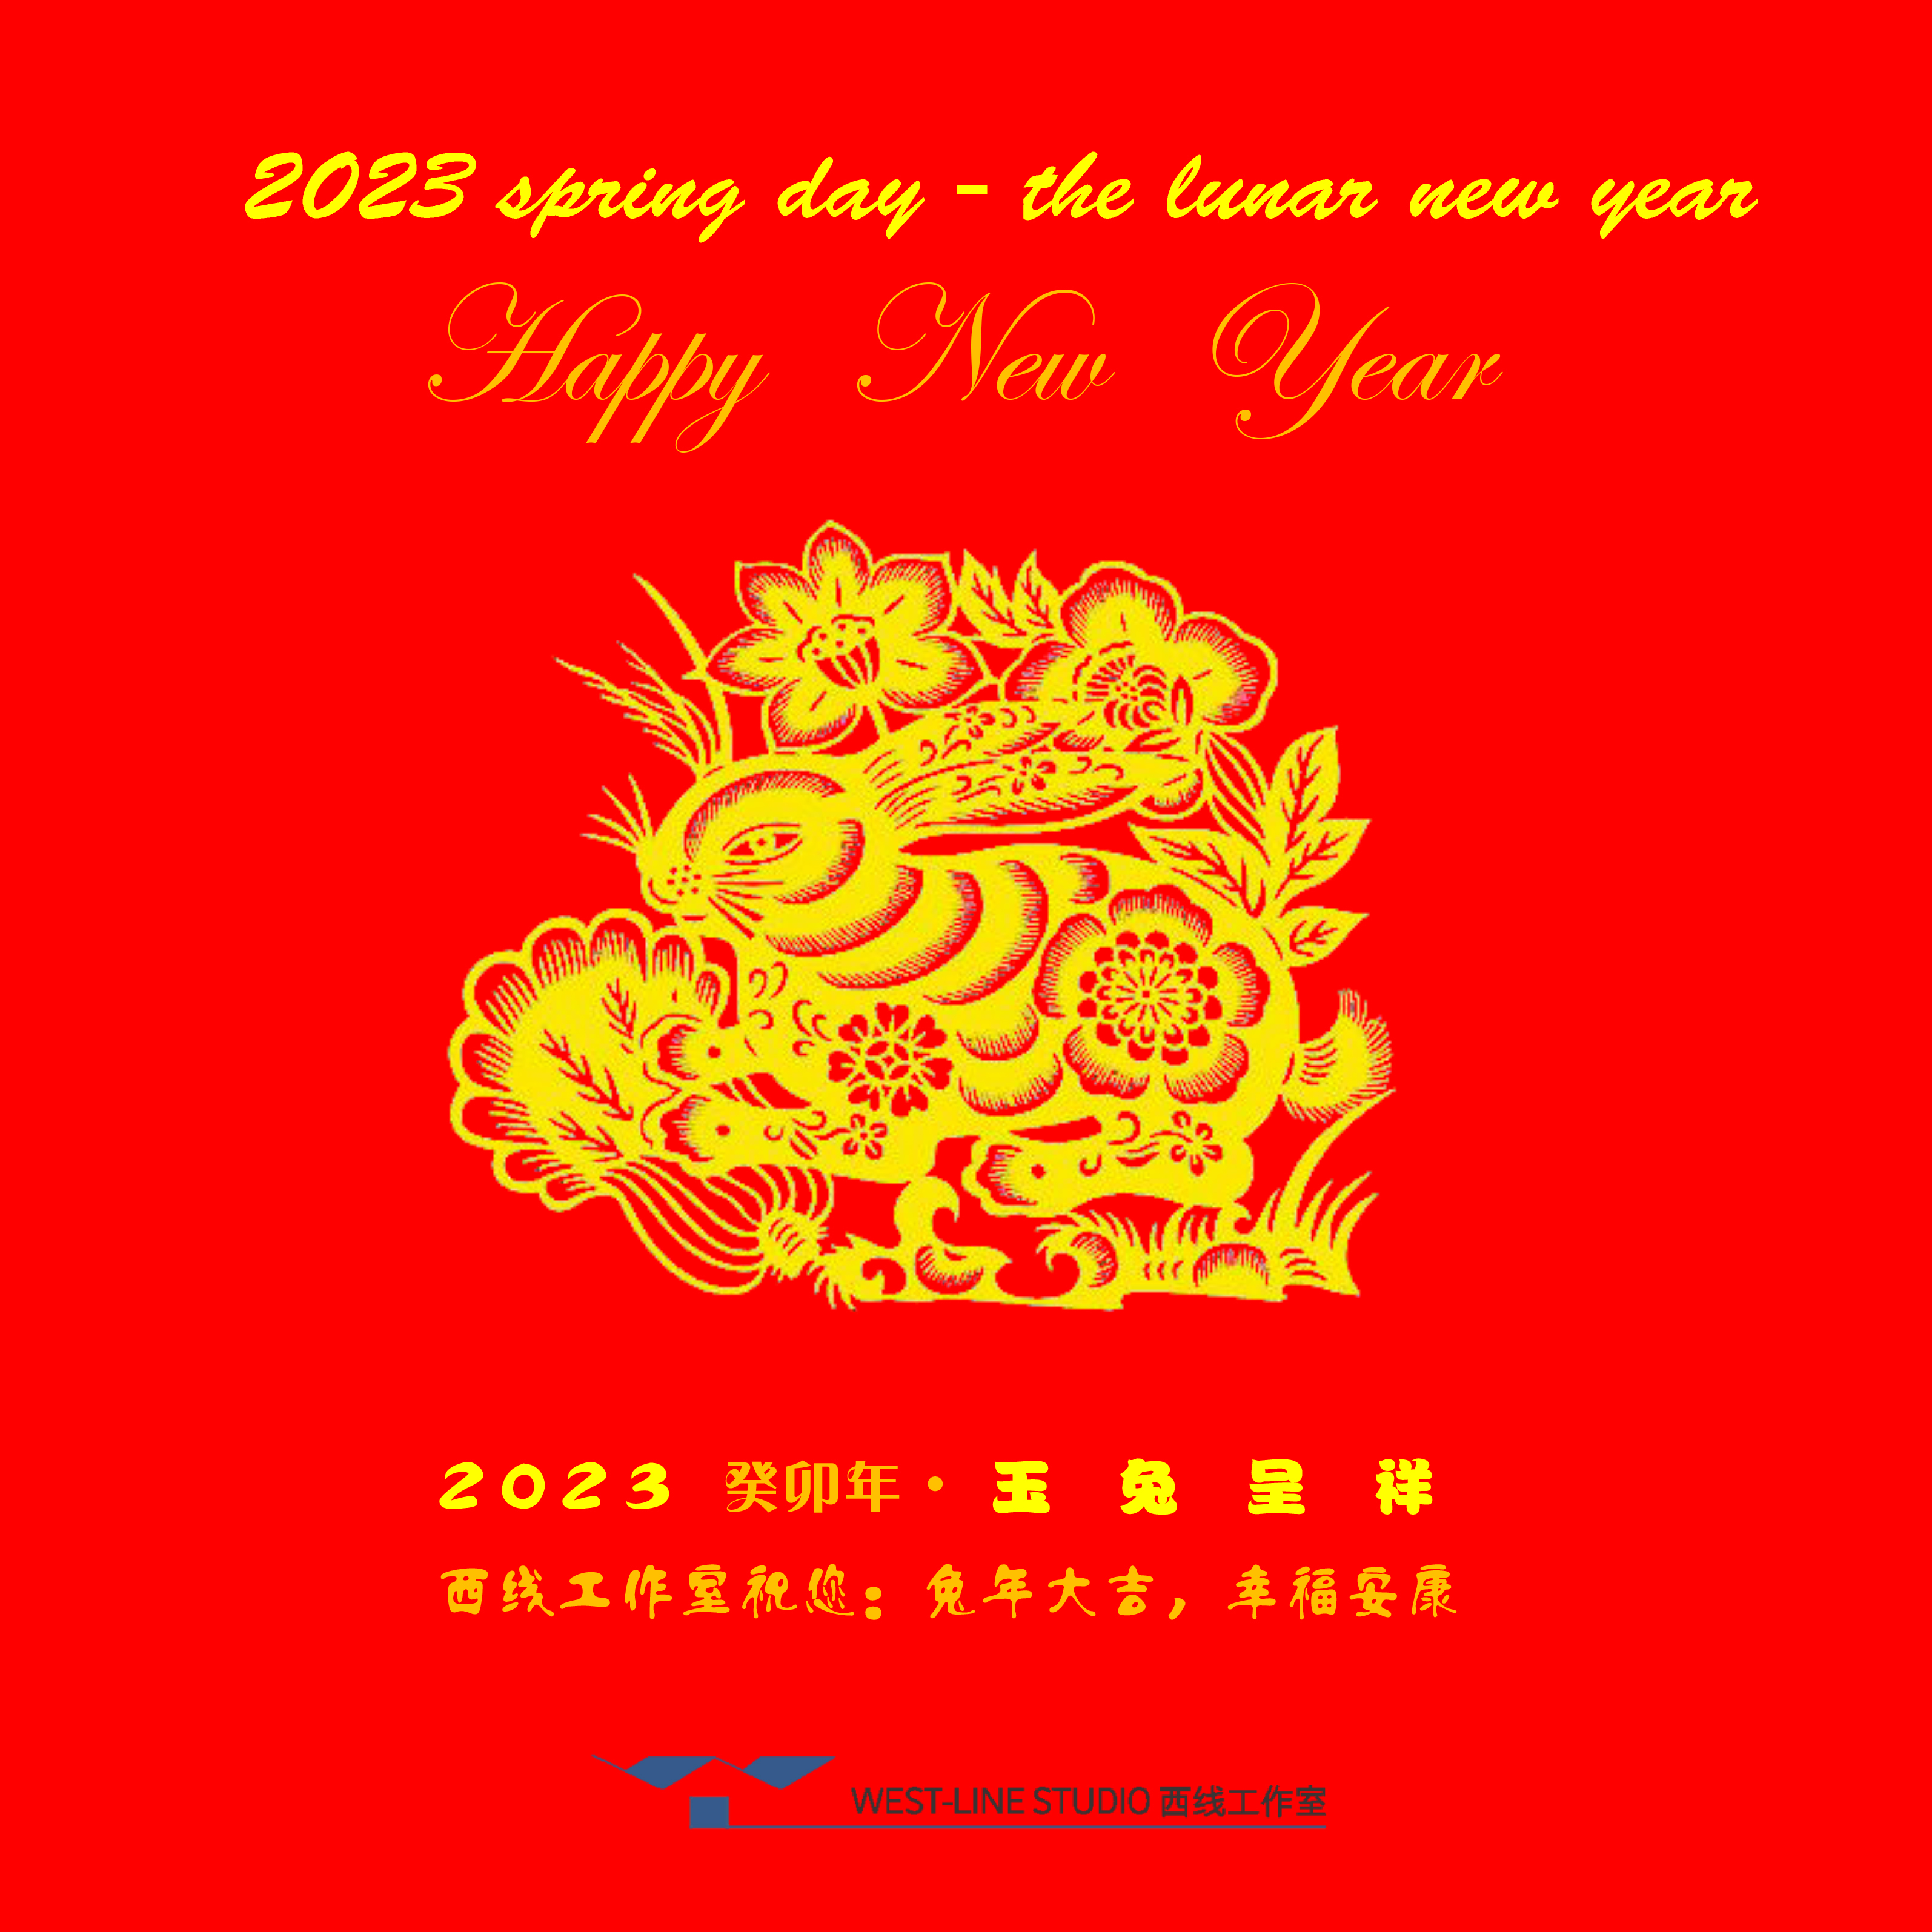 Wishing you luck for the year of the Rabbit (2023) , and may good fortune fall upon you!